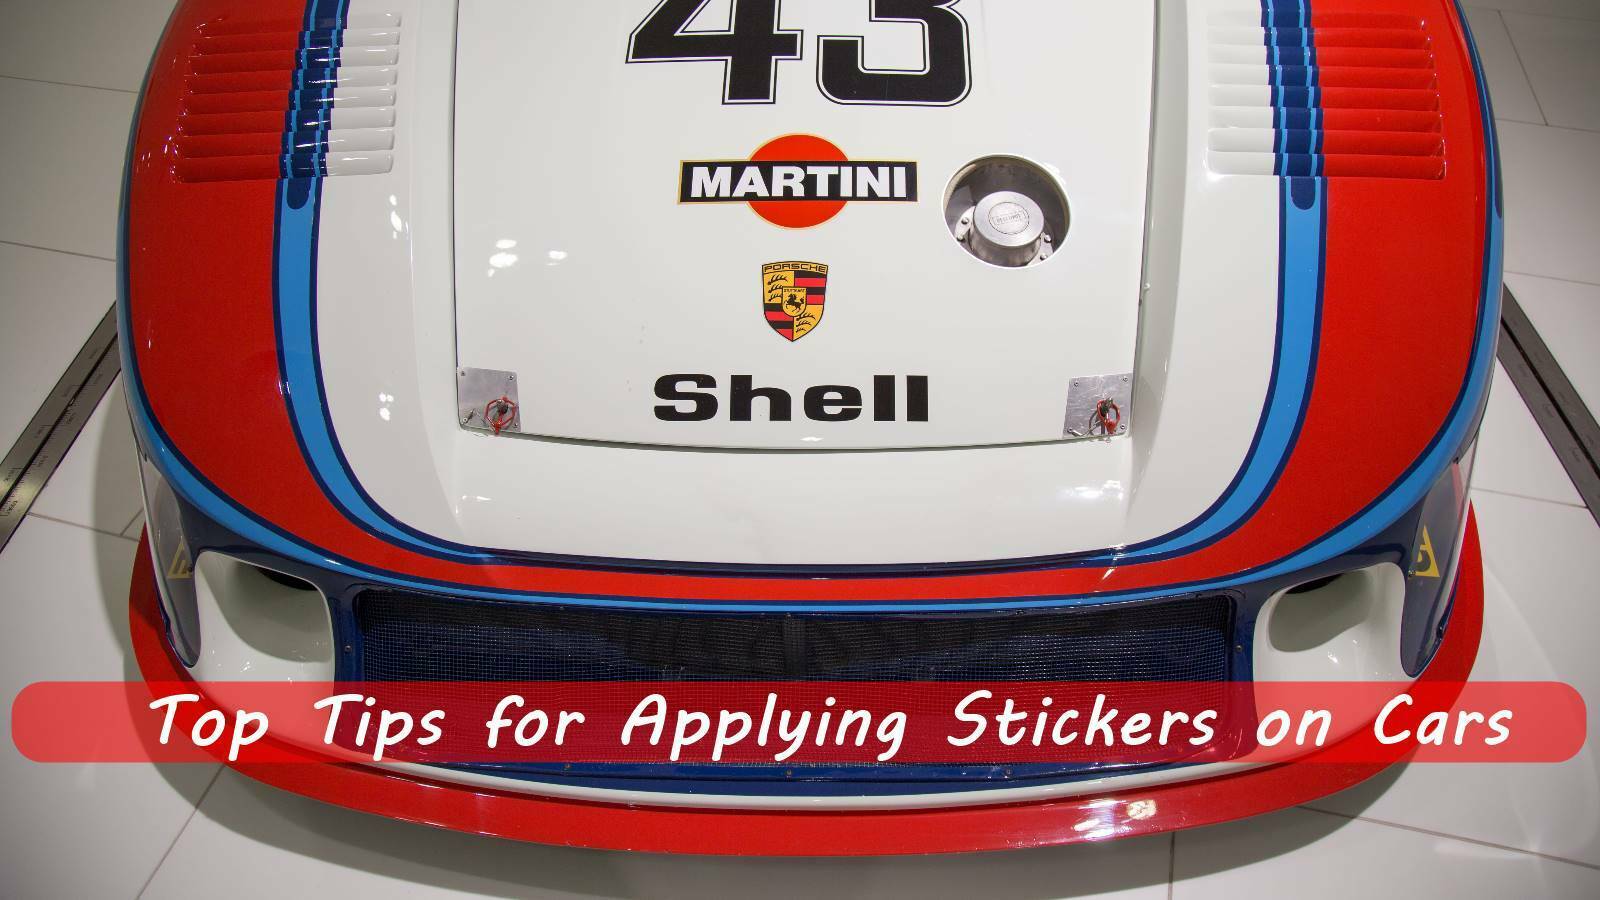 Top Tips for Applying Stickers on Cars